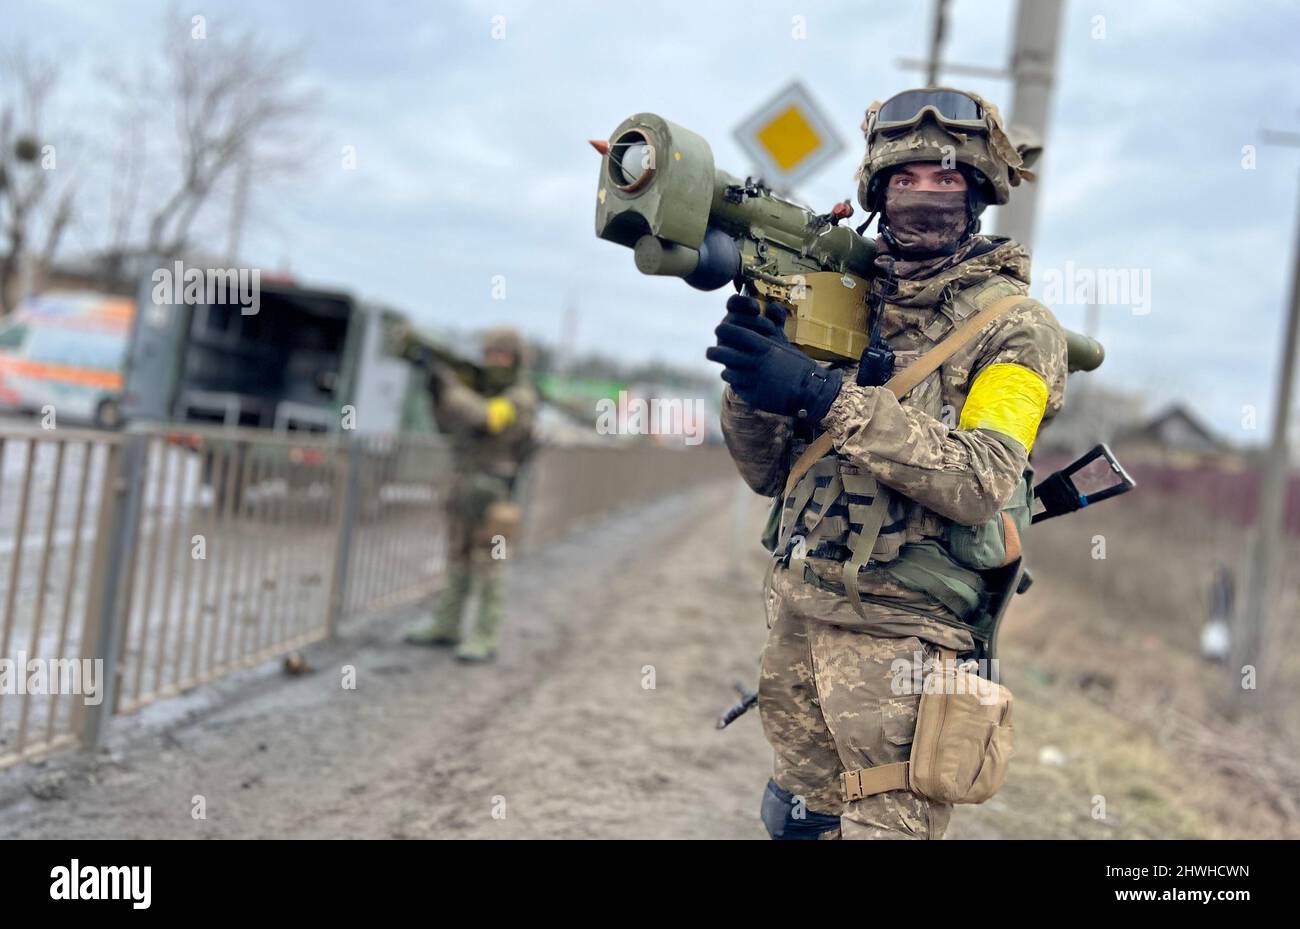 Armed Ukrainian soldiers pose with missiles in Kyiv, Ukraine, during the Russian invasion, as Russia invaded Ukraine on February 24, pictured on March Stock Photo